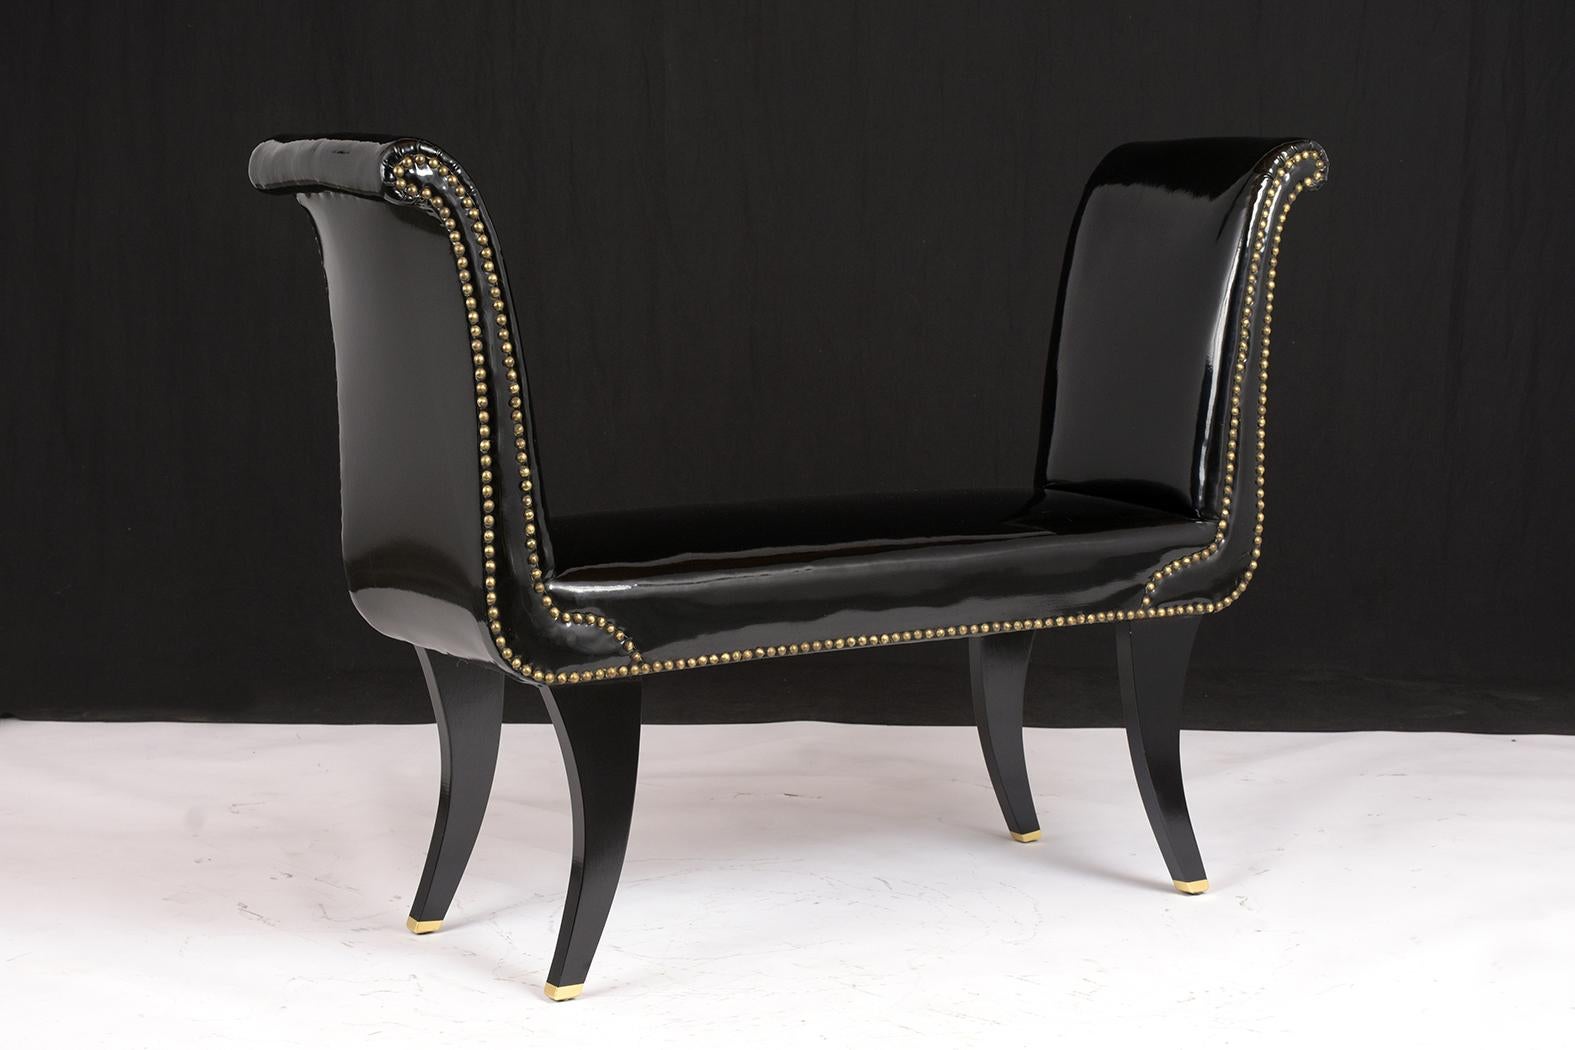 This 1960s Regency Style Bench has been restored and features its original organic black acrylic vinyl upholstery in good condition. The bench also has scroll arms with brass nail trim accents run along the sides. The seat has a coil spring making